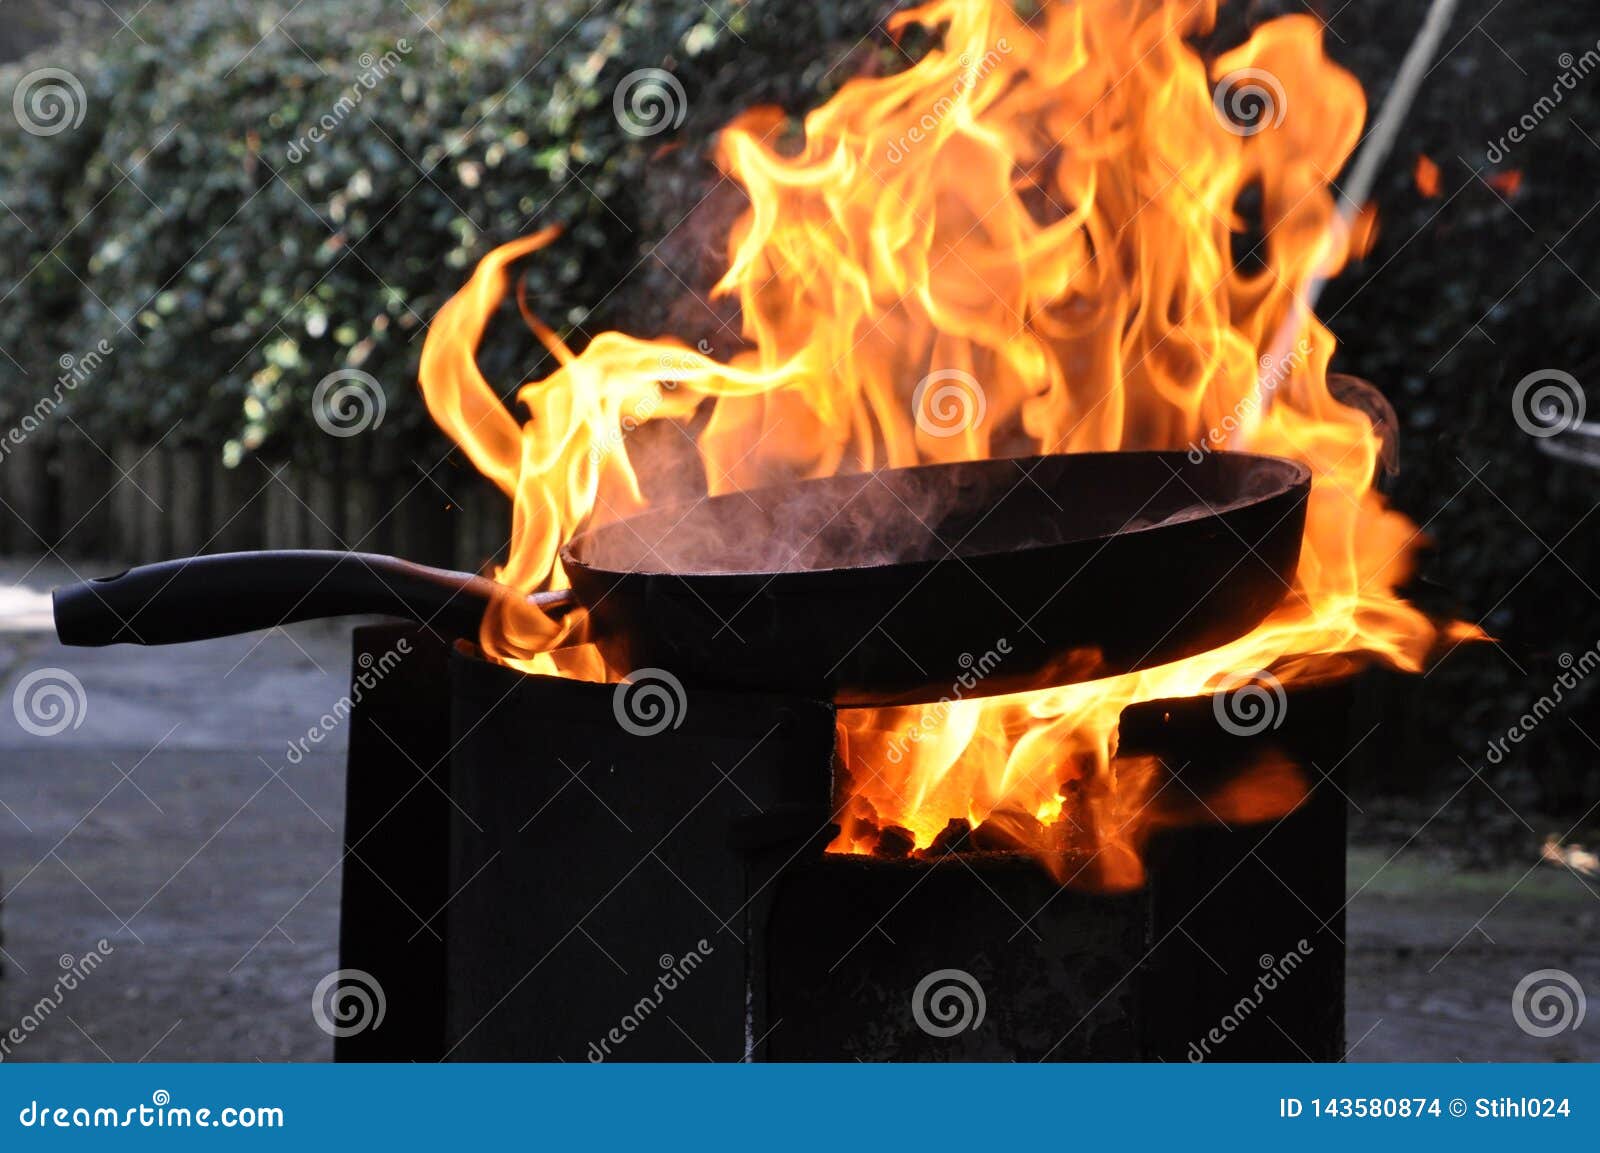 Frying Pan On Open Fire Place With Burning Flames Stock Photo Image